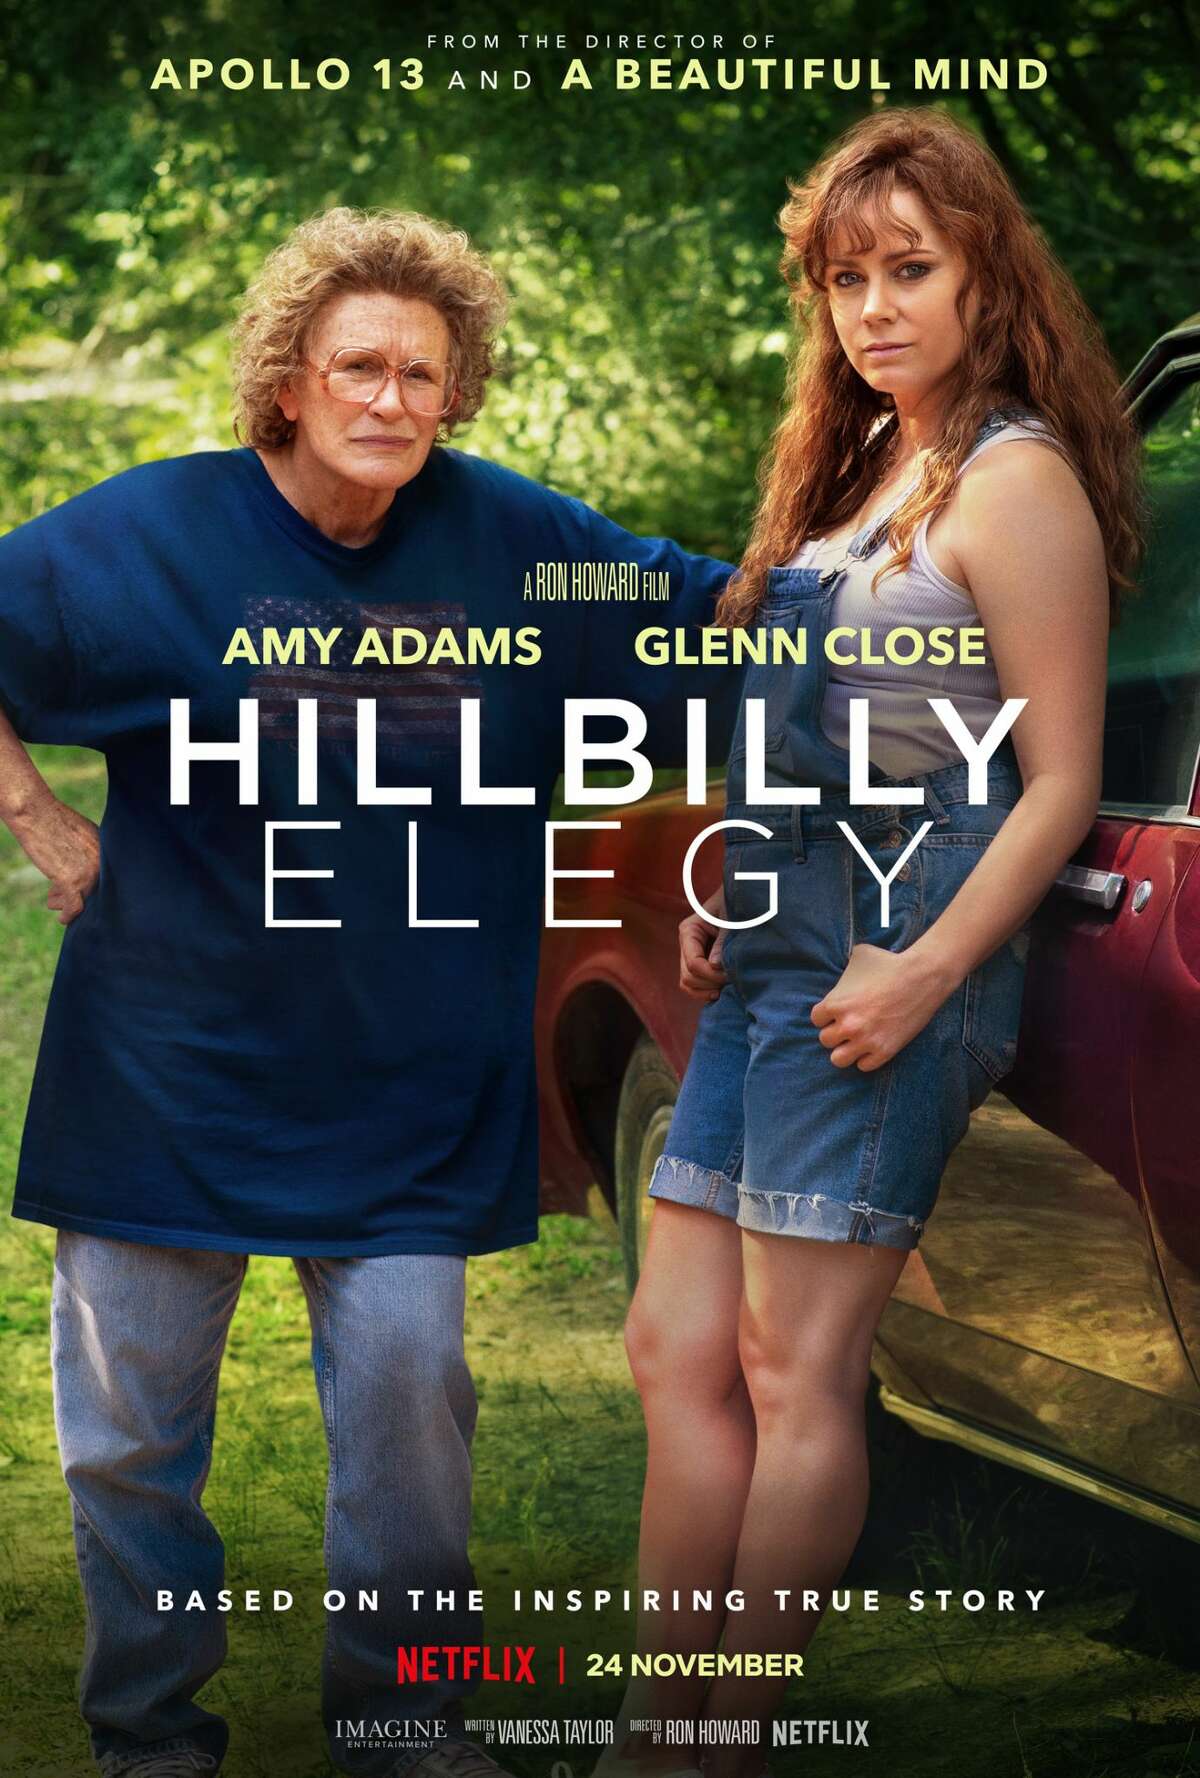 The "Hillbilly Elegy" movie poster. The film shows some shots of the Yale campus, but according to IMDB, all filming took place in Georgia and Ohio.